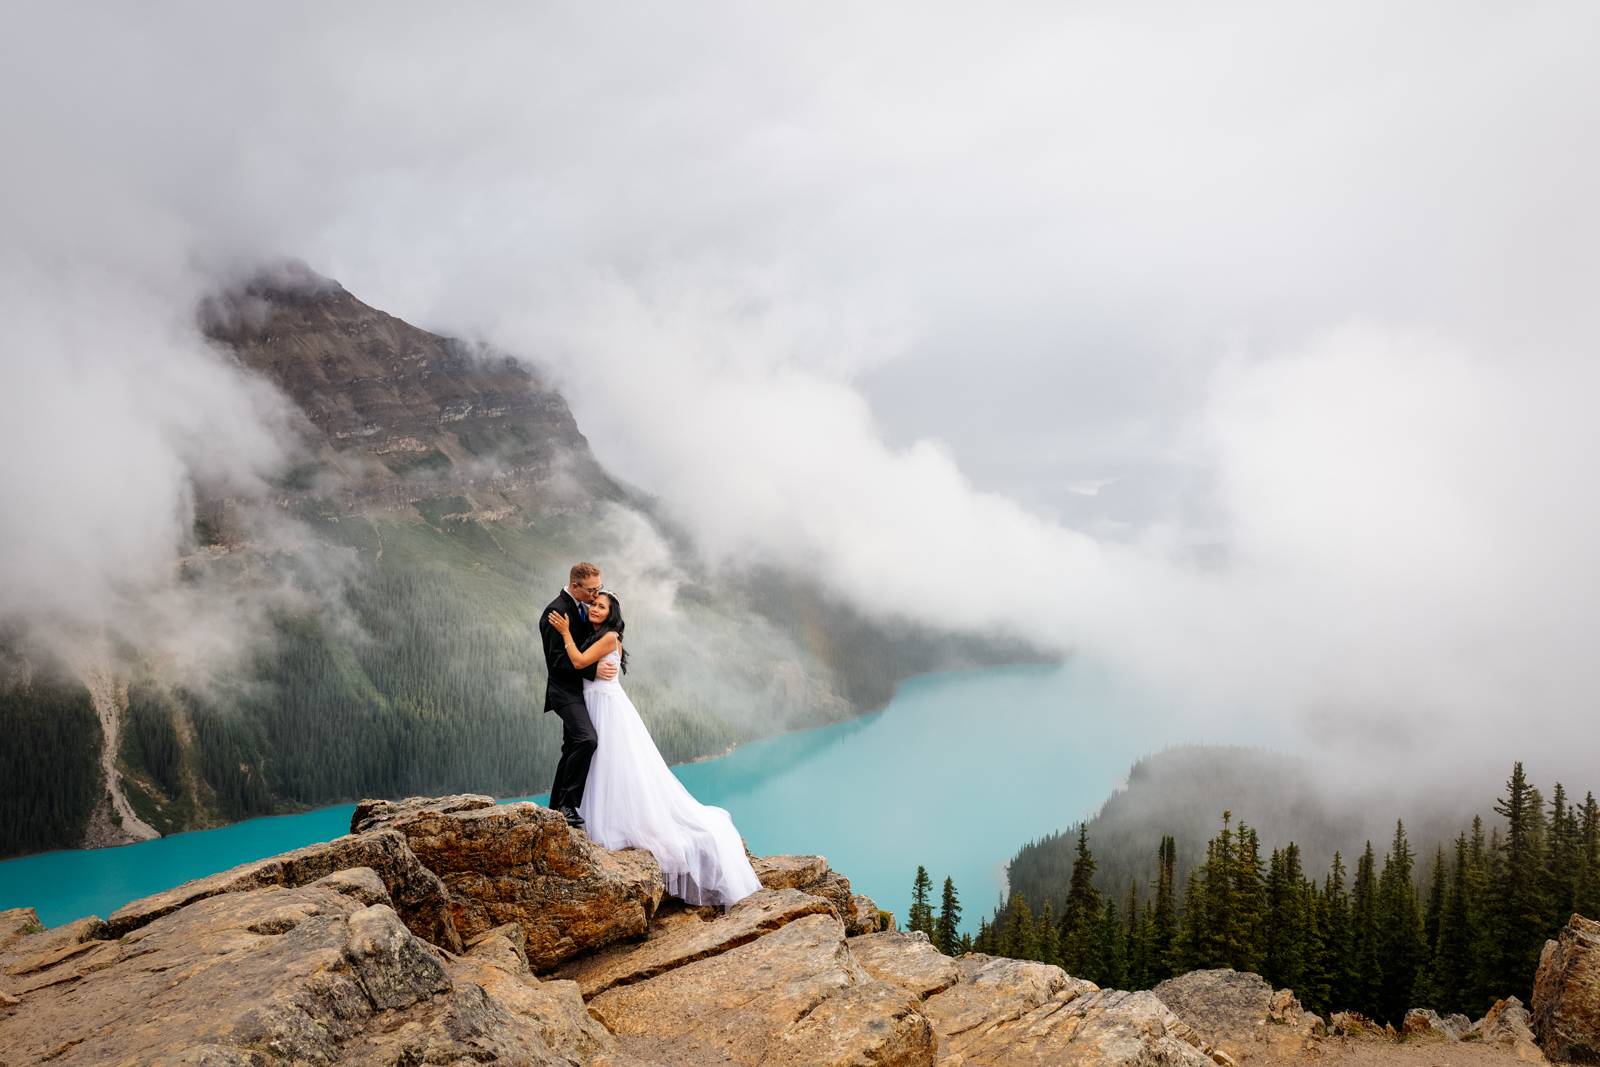 married couple holding each other in the cloudy day at the top of the mountain